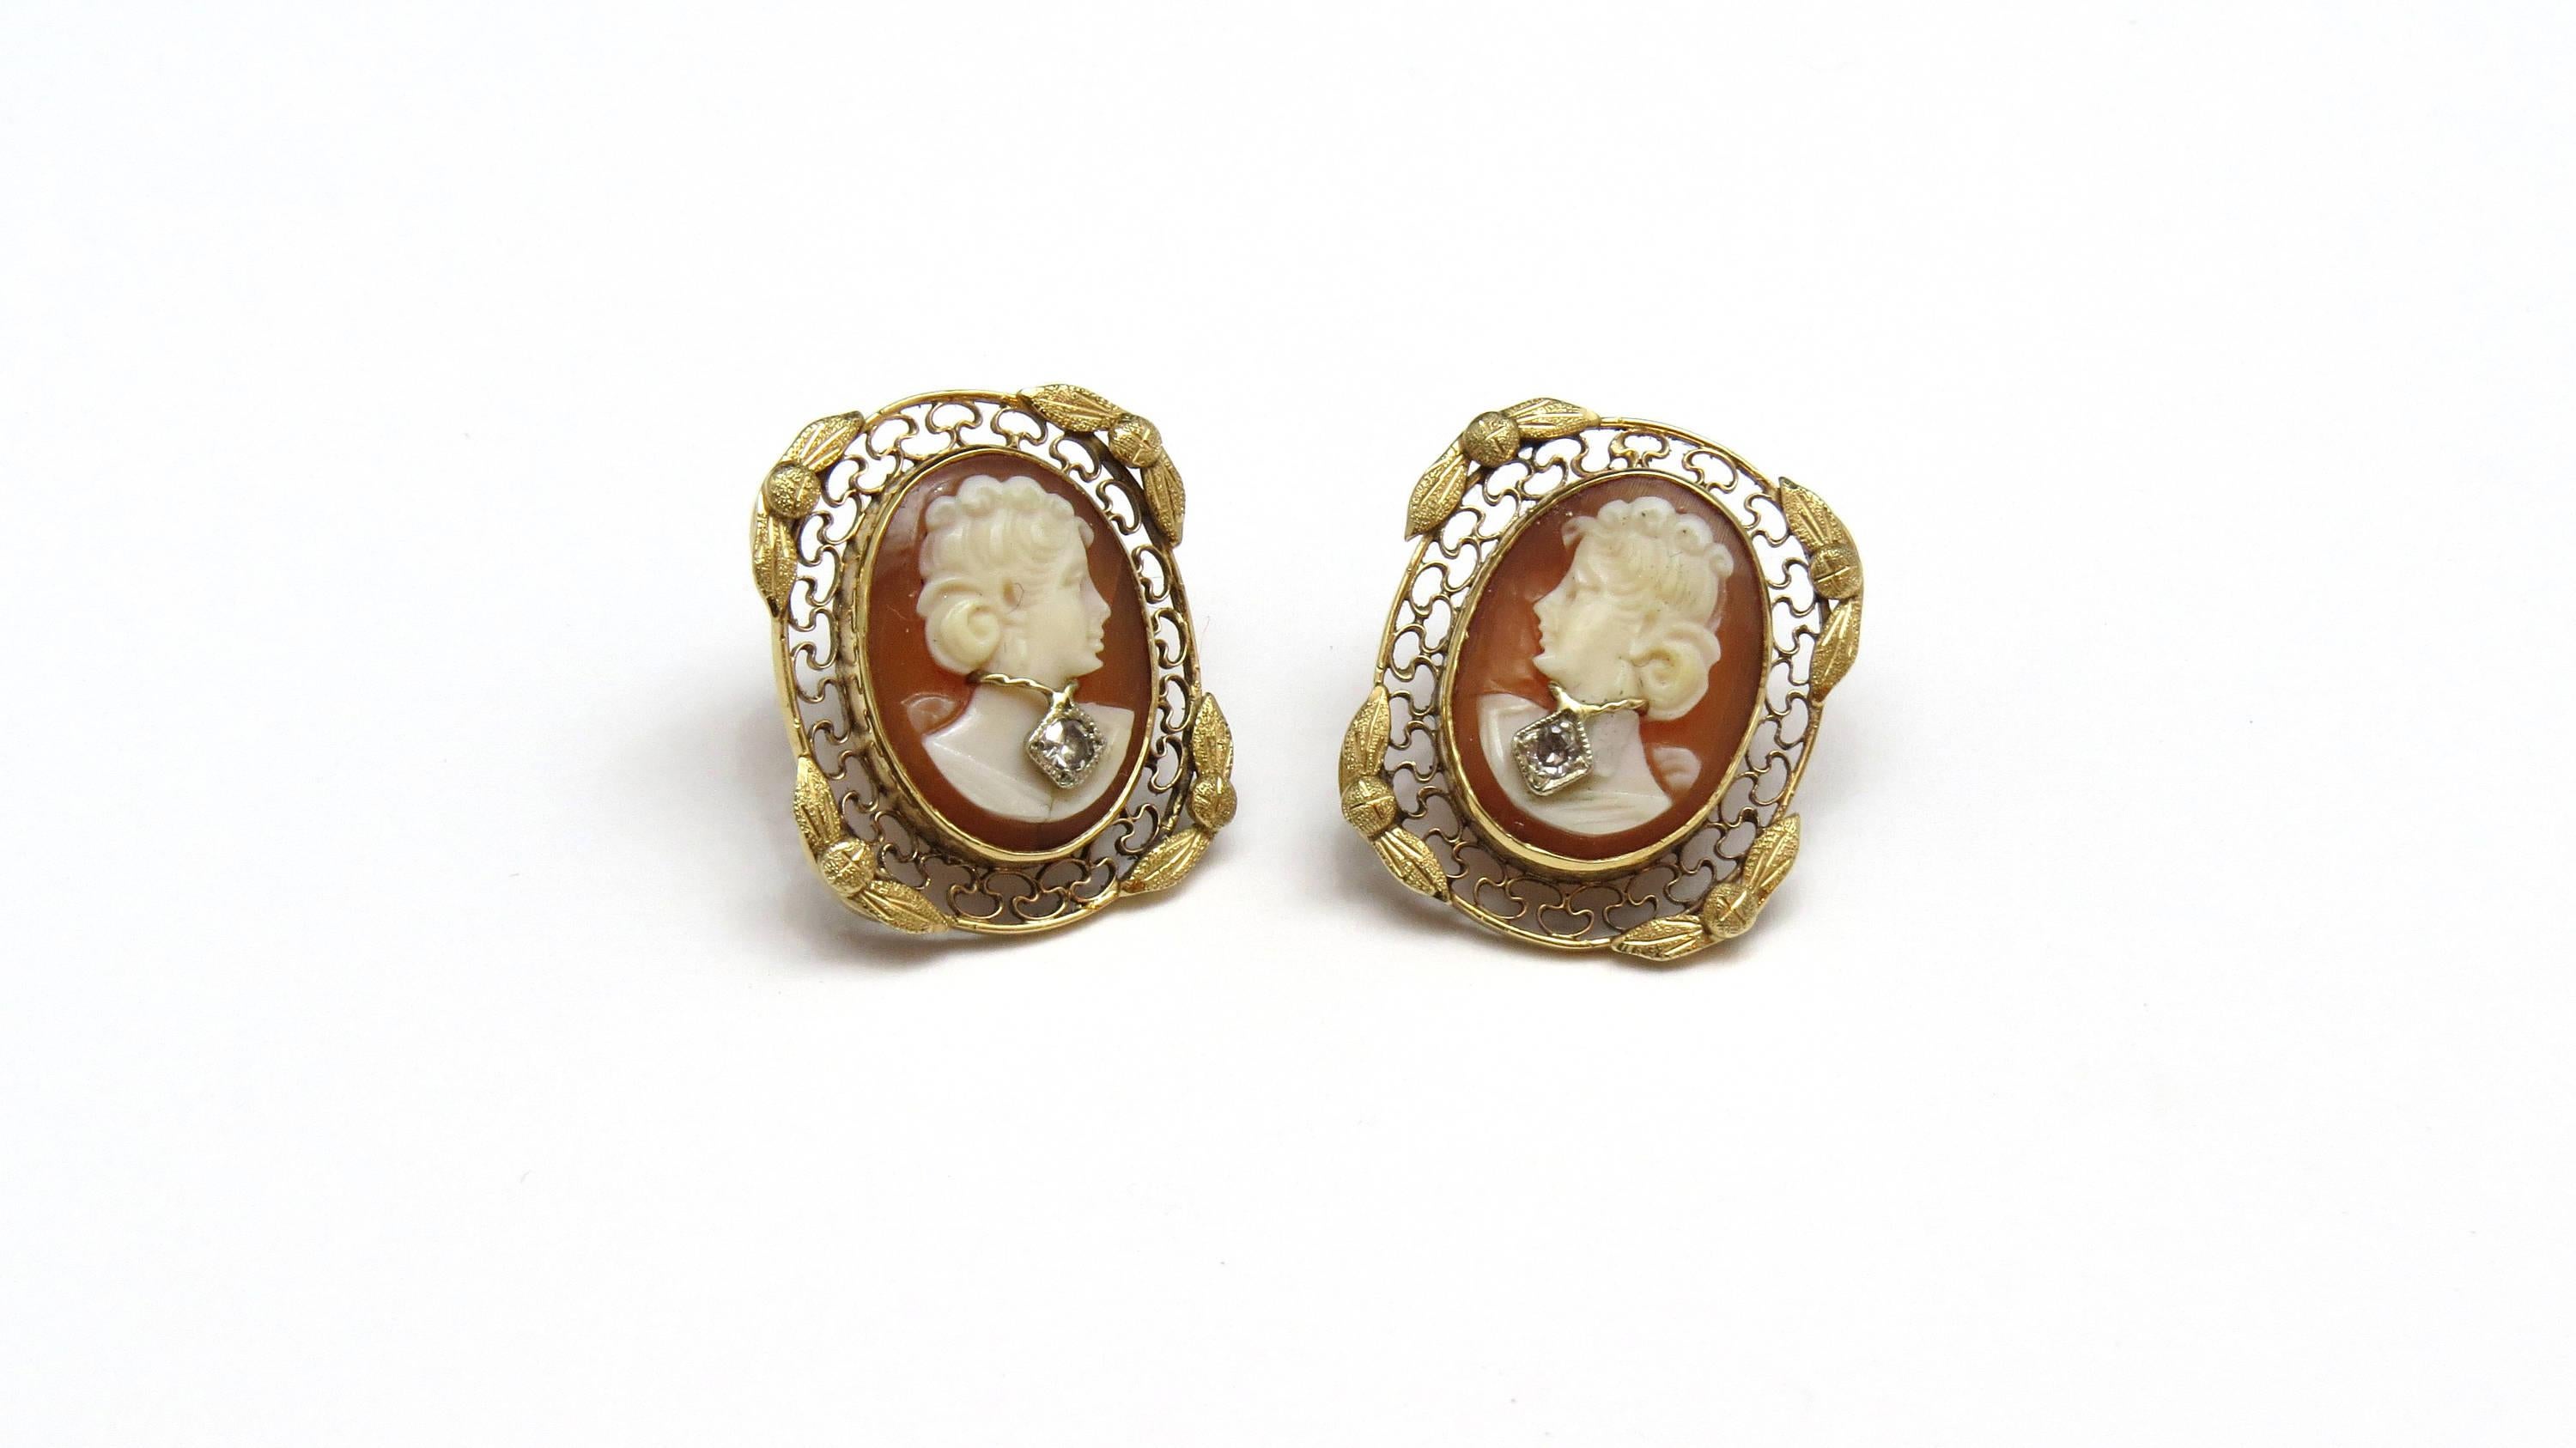 Vintage 14K Yellow Gold and Diamond Cameo Filigree Earrings 
21 mm by 17.5 mm 
4.4 dwt /6.9 g 
Necklace on the cameo contains a single cut diamond of about .02cts 
Screw backs - for pierced ears 
Tested and stamped 14K 
All of our items are packaged